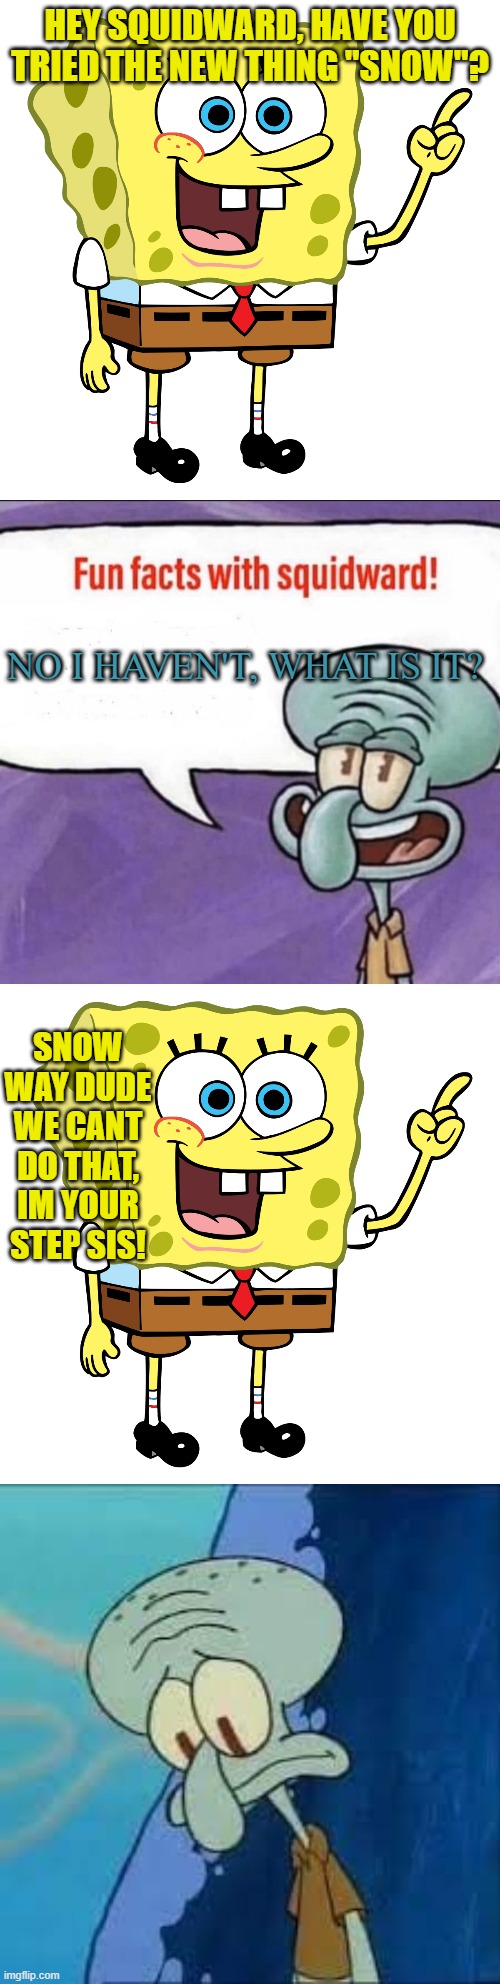 HEY SQUIDWARD, HAVE YOU TRIED THE NEW THING "SNOW"? NO I HAVEN'T, WHAT IS IT? SNOW WAY DUDE WE CANT DO THAT, IM YOUR STEP SIS! | image tagged in fun facts with squidward | made w/ Imgflip meme maker